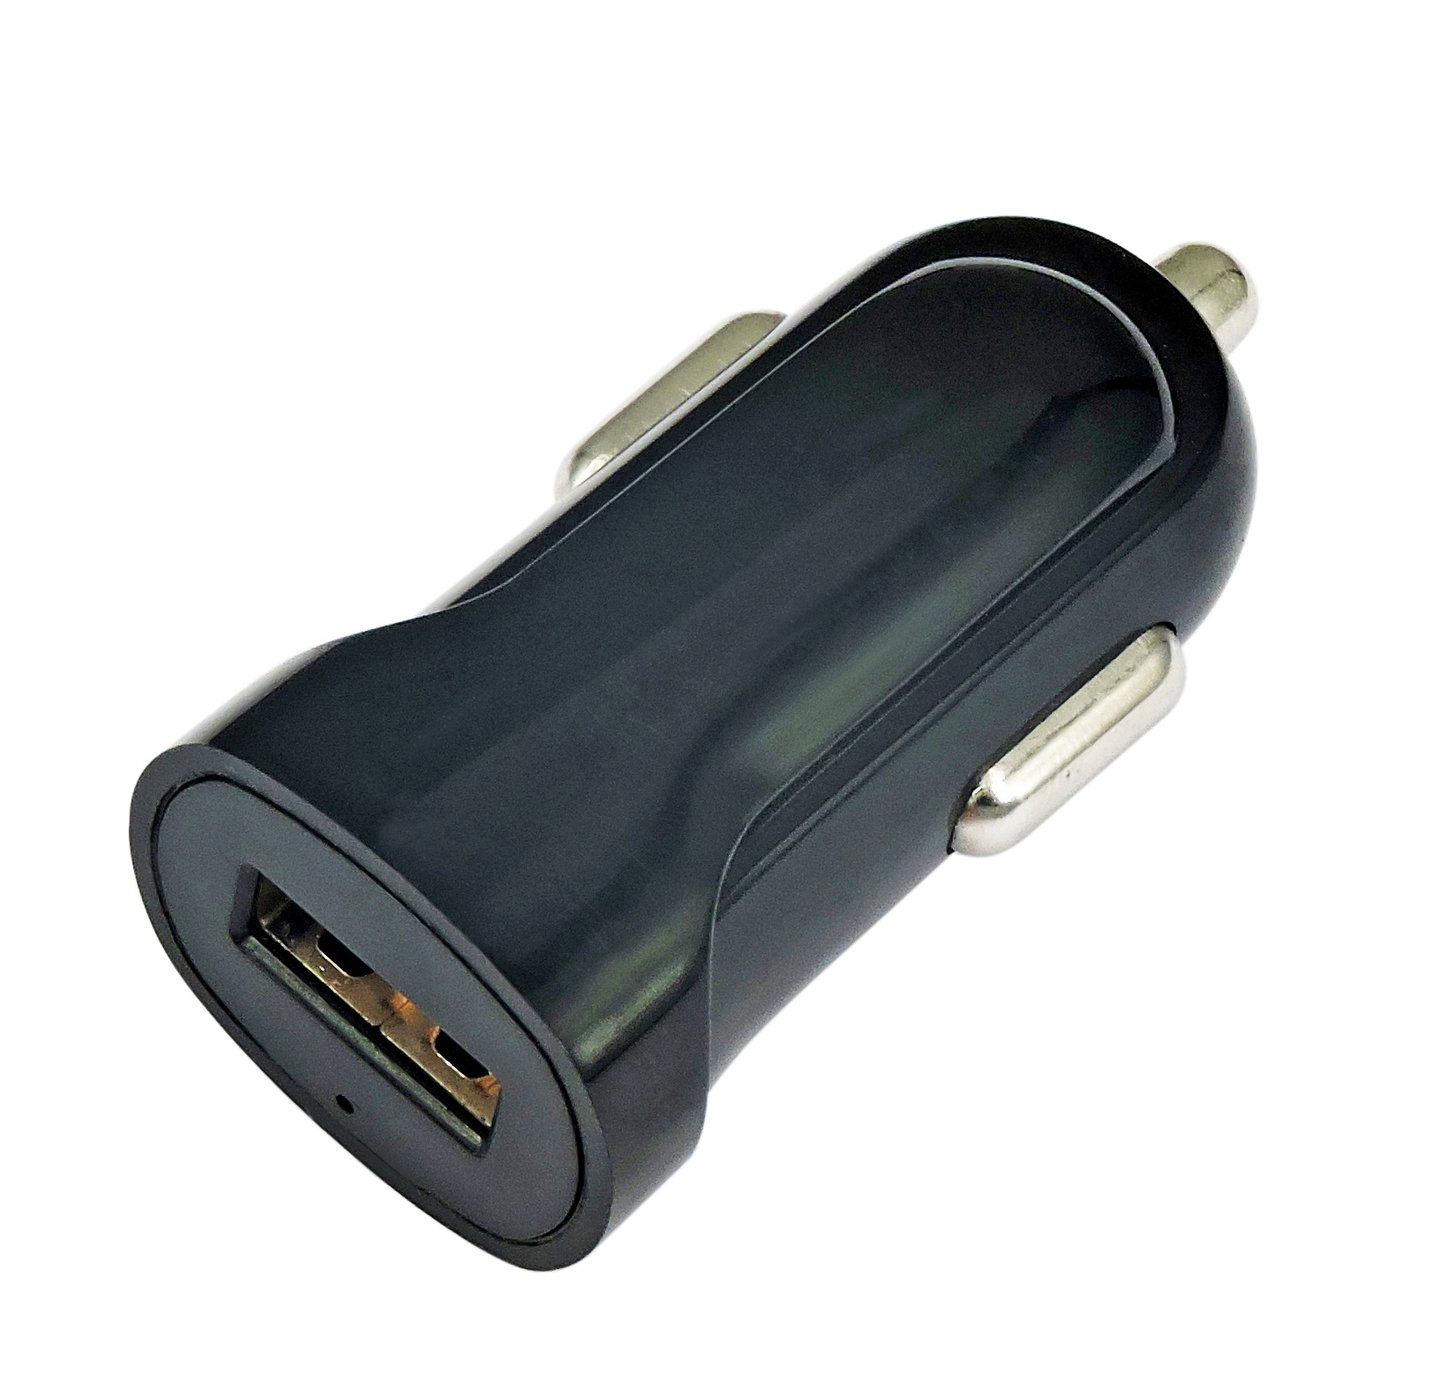 12-24W Bullet USB Car Charger Review